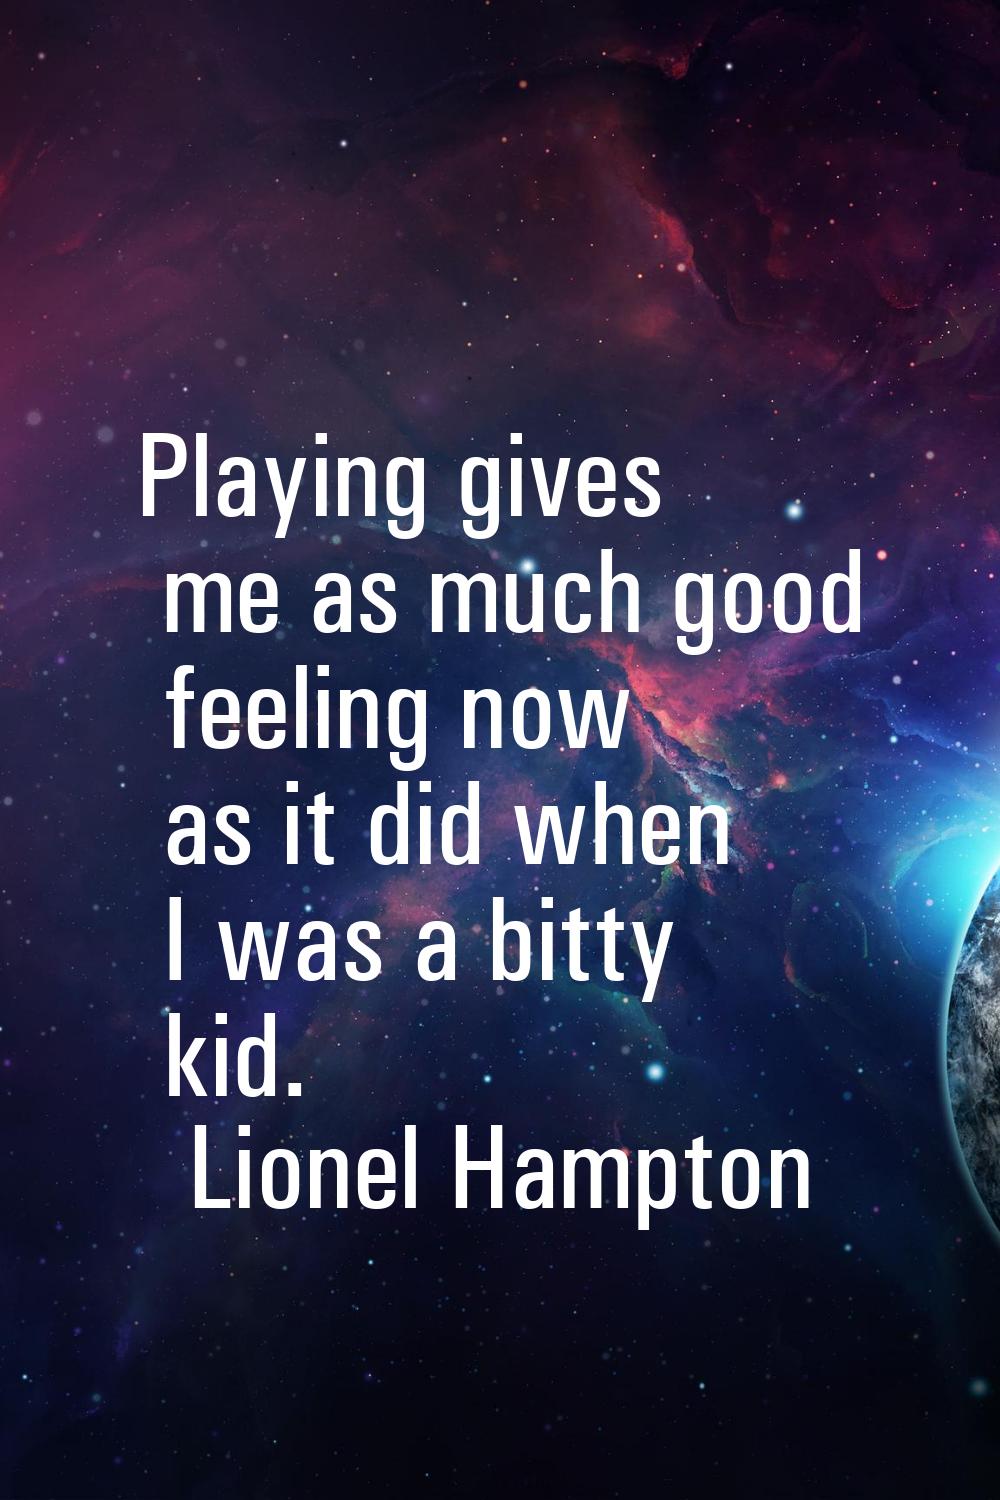 Playing gives me as much good feeling now as it did when I was a bitty kid.